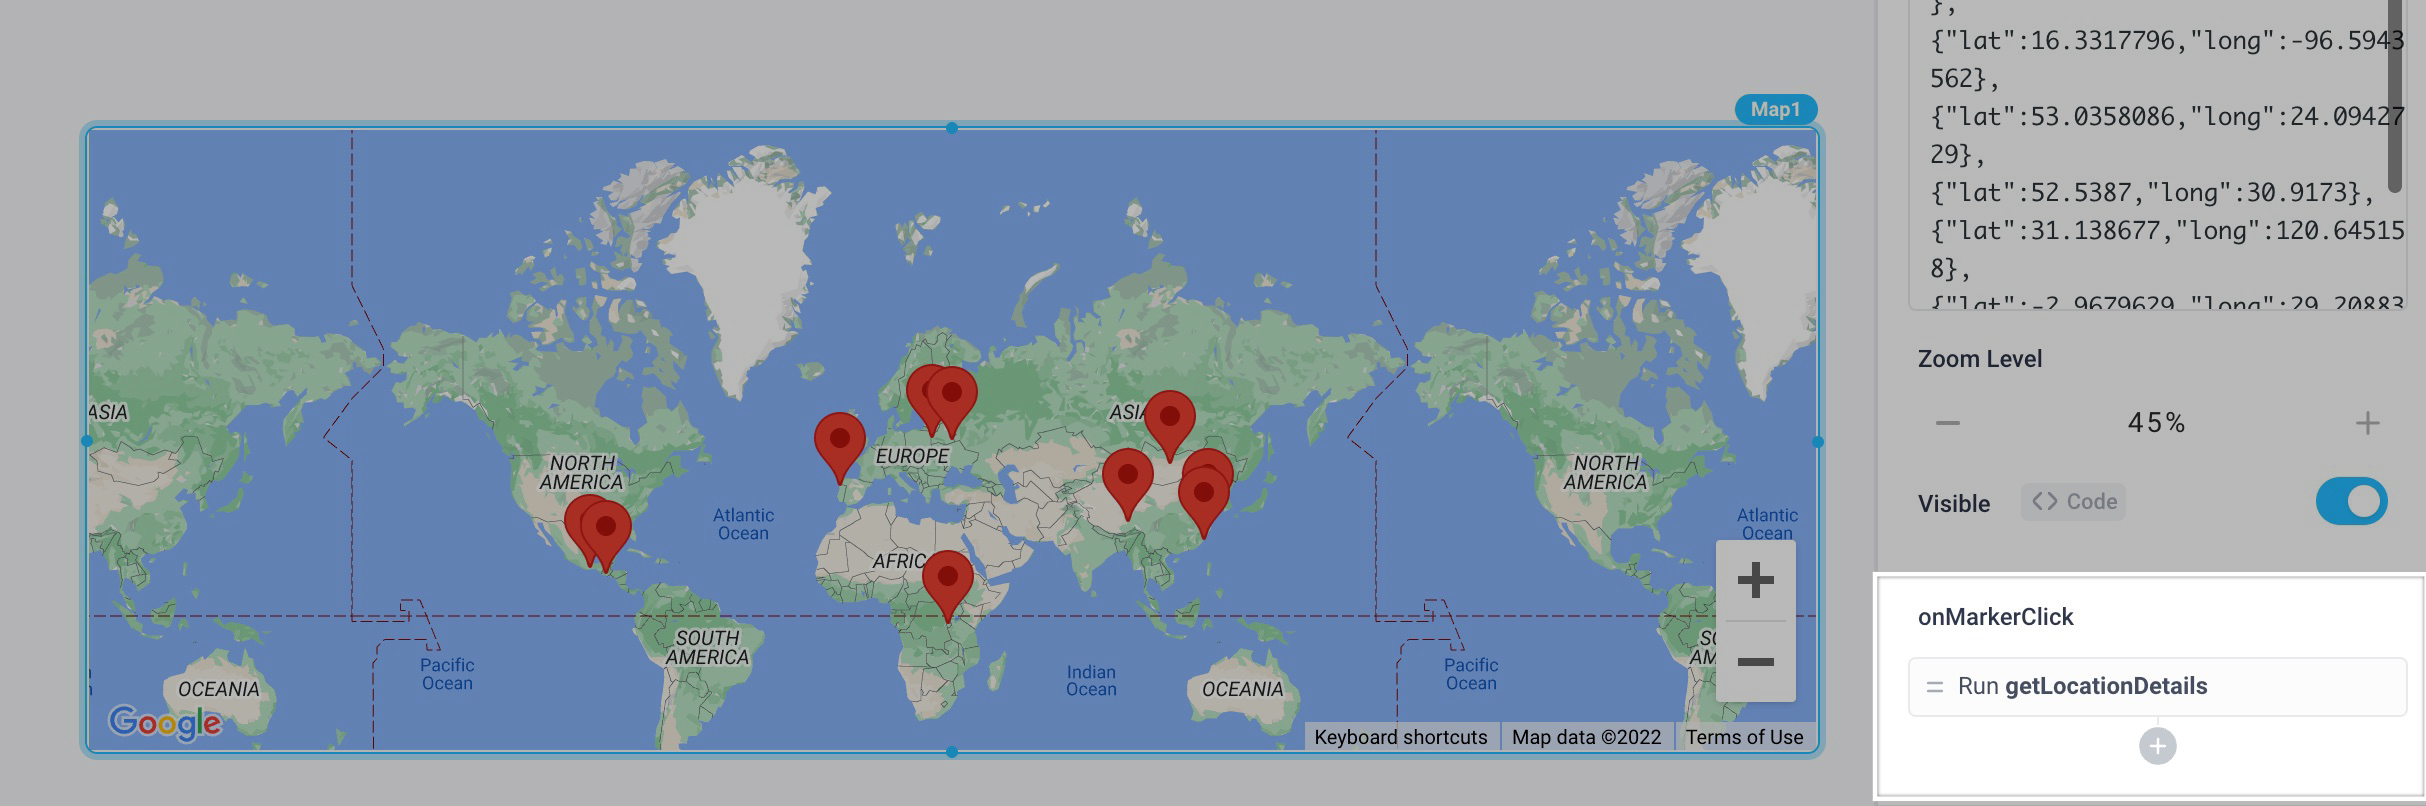 Use event handlers to trigger actions, such as running an API, when a user clicks on a marker within the map